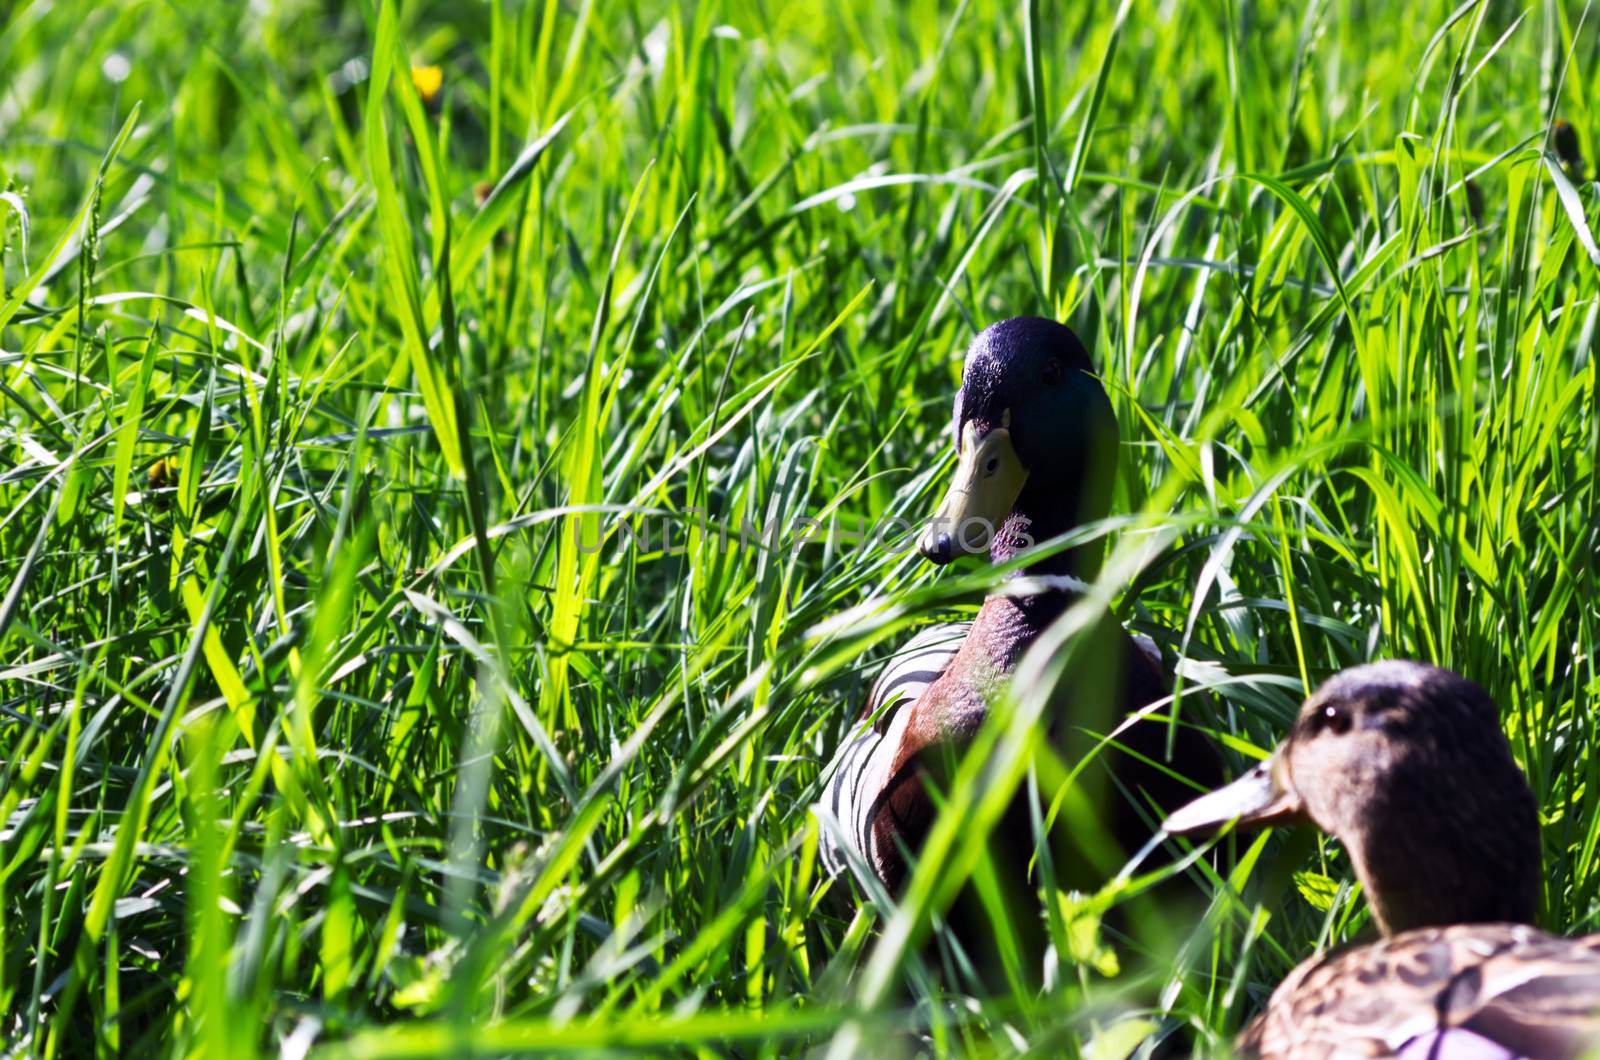 Ducks in the grass. Focus on the back duck by dolnikow